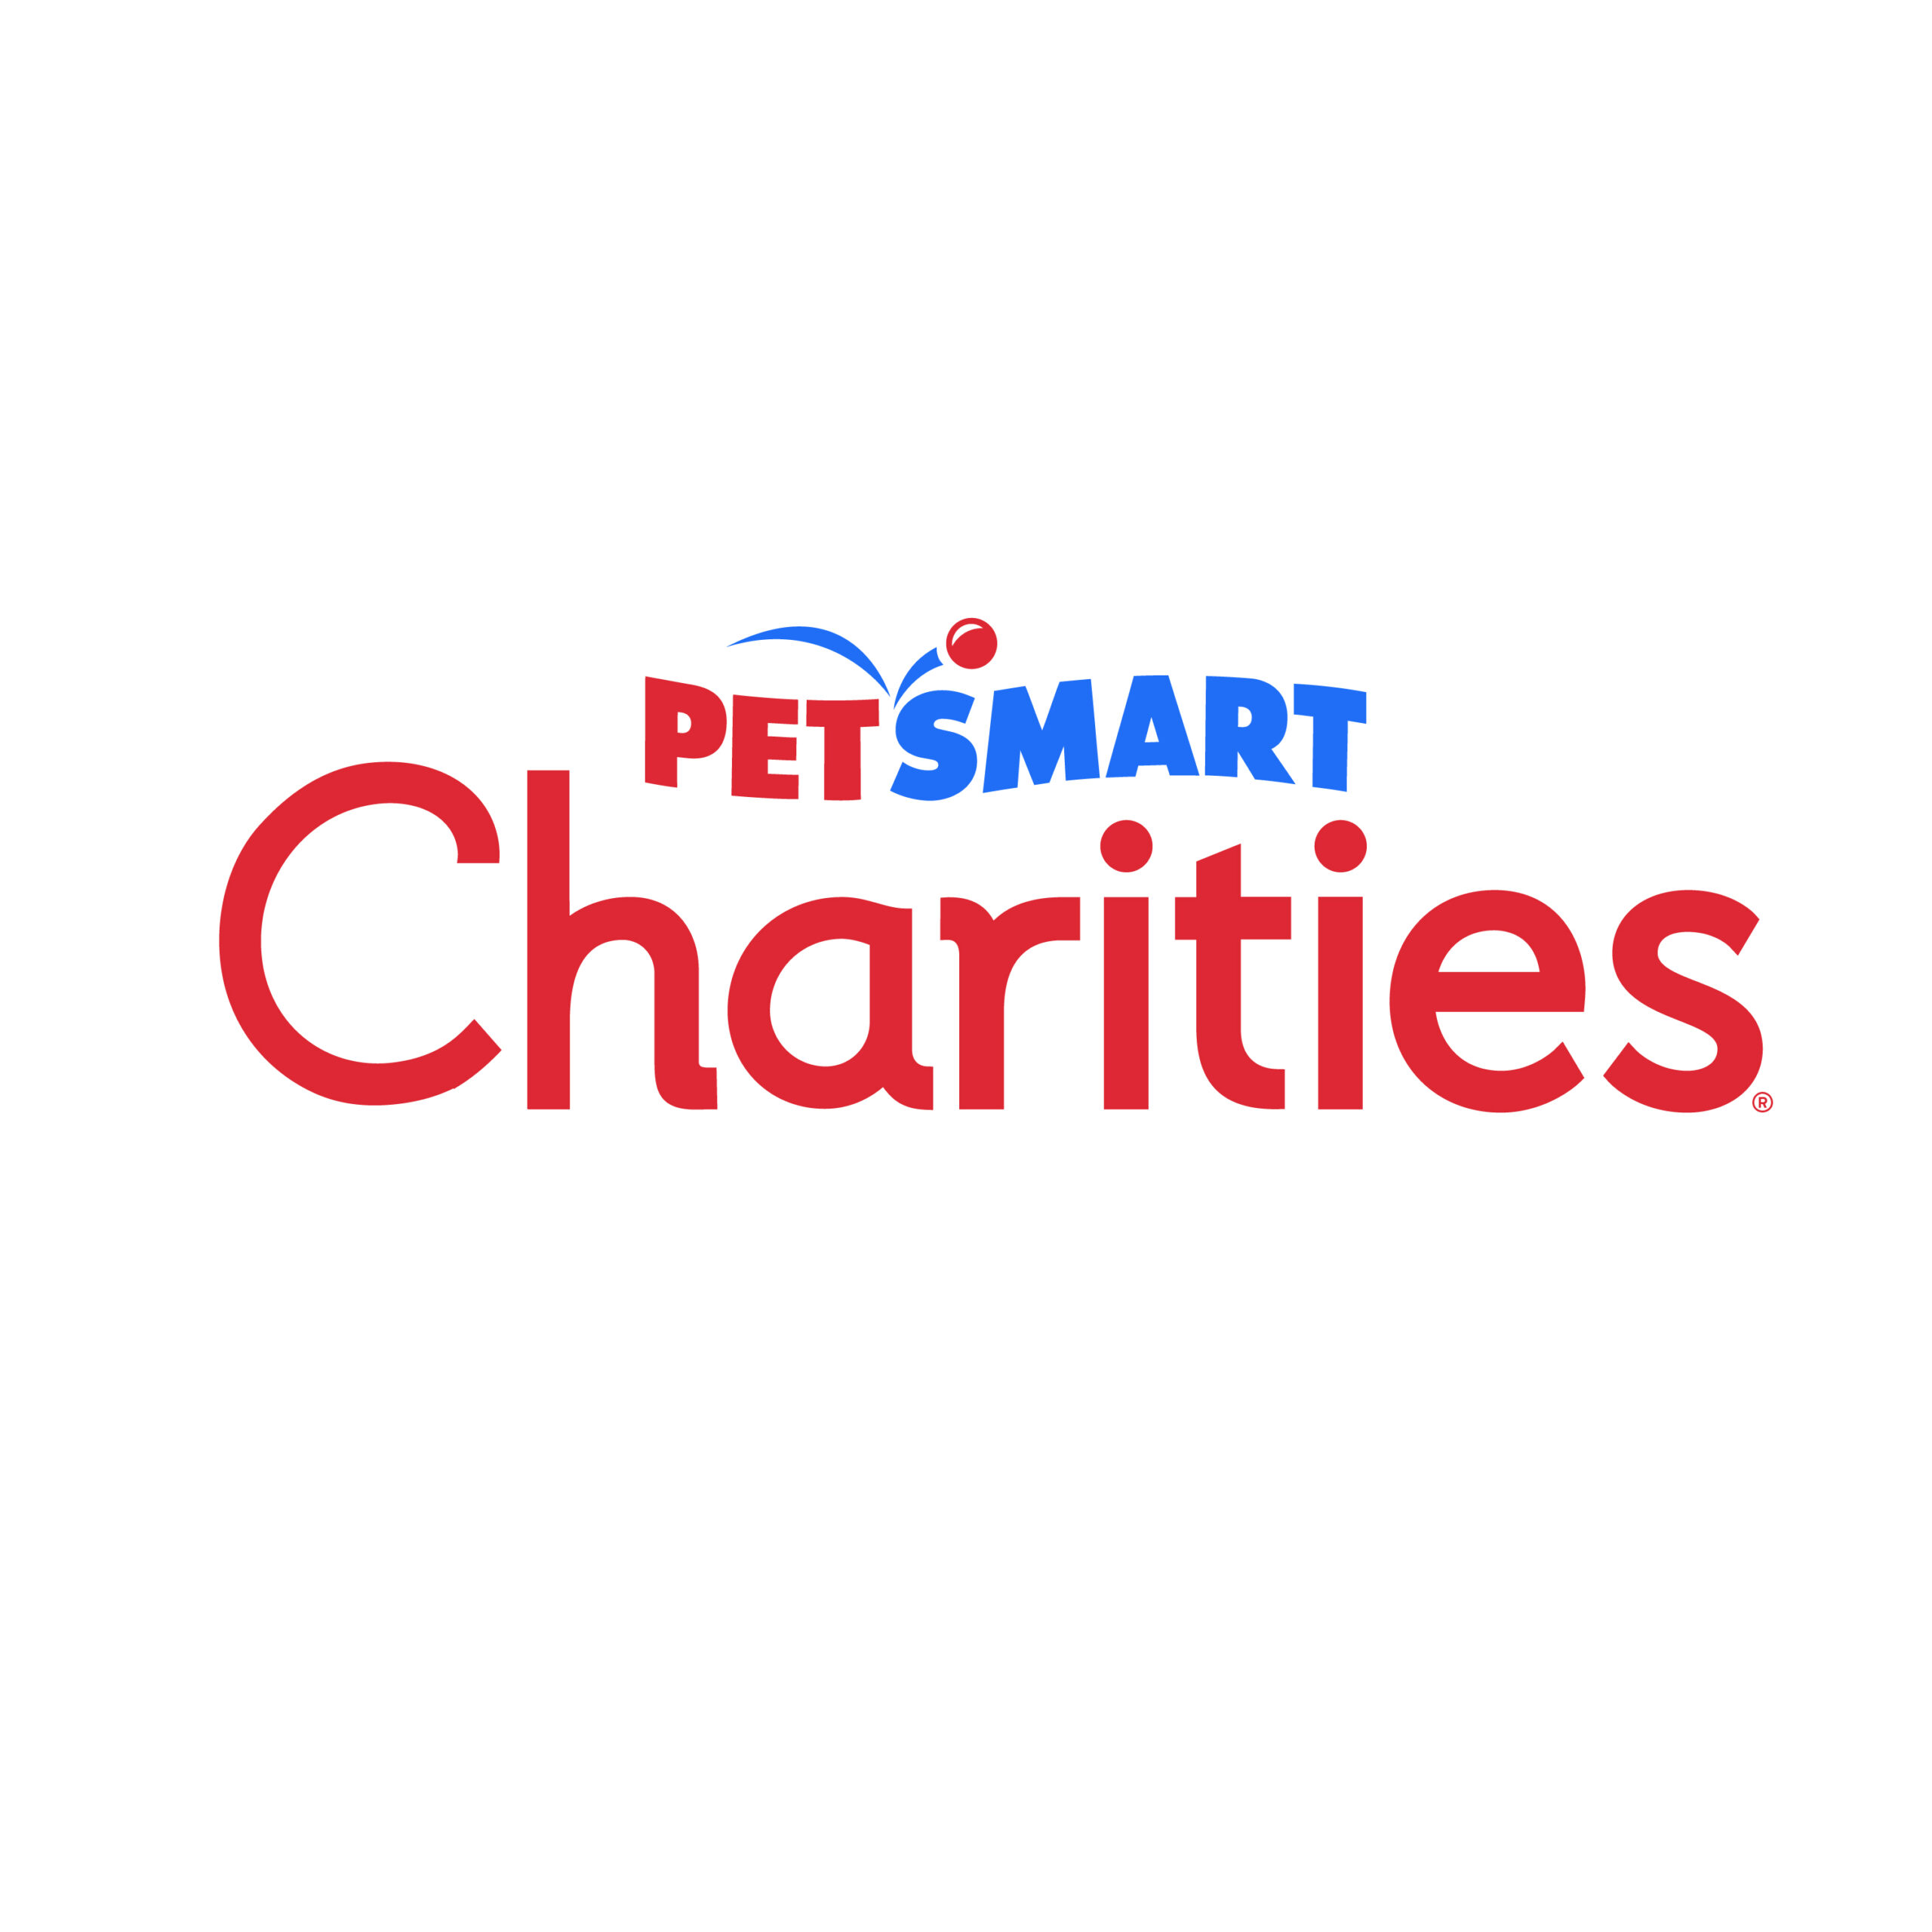 PetSmart Charities to Name Endowed Chair at UC Davis School of Veterinary Medicine with $6 Million Gift